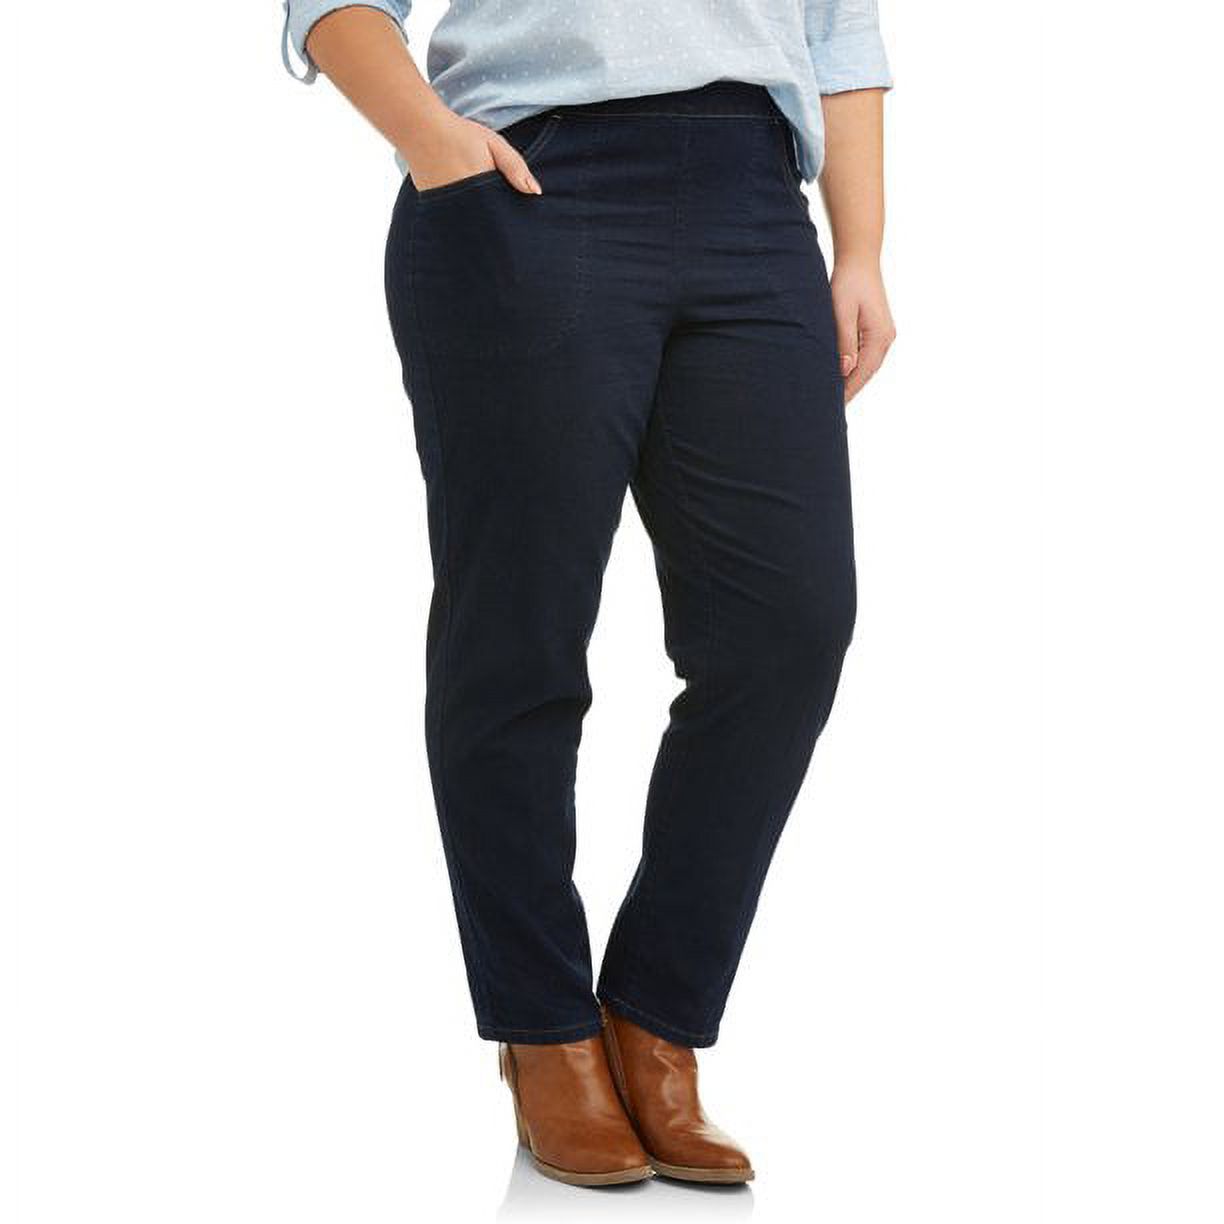 Just My Size Women's Plus 2 Pocket Pull-On Pant - image 4 of 7